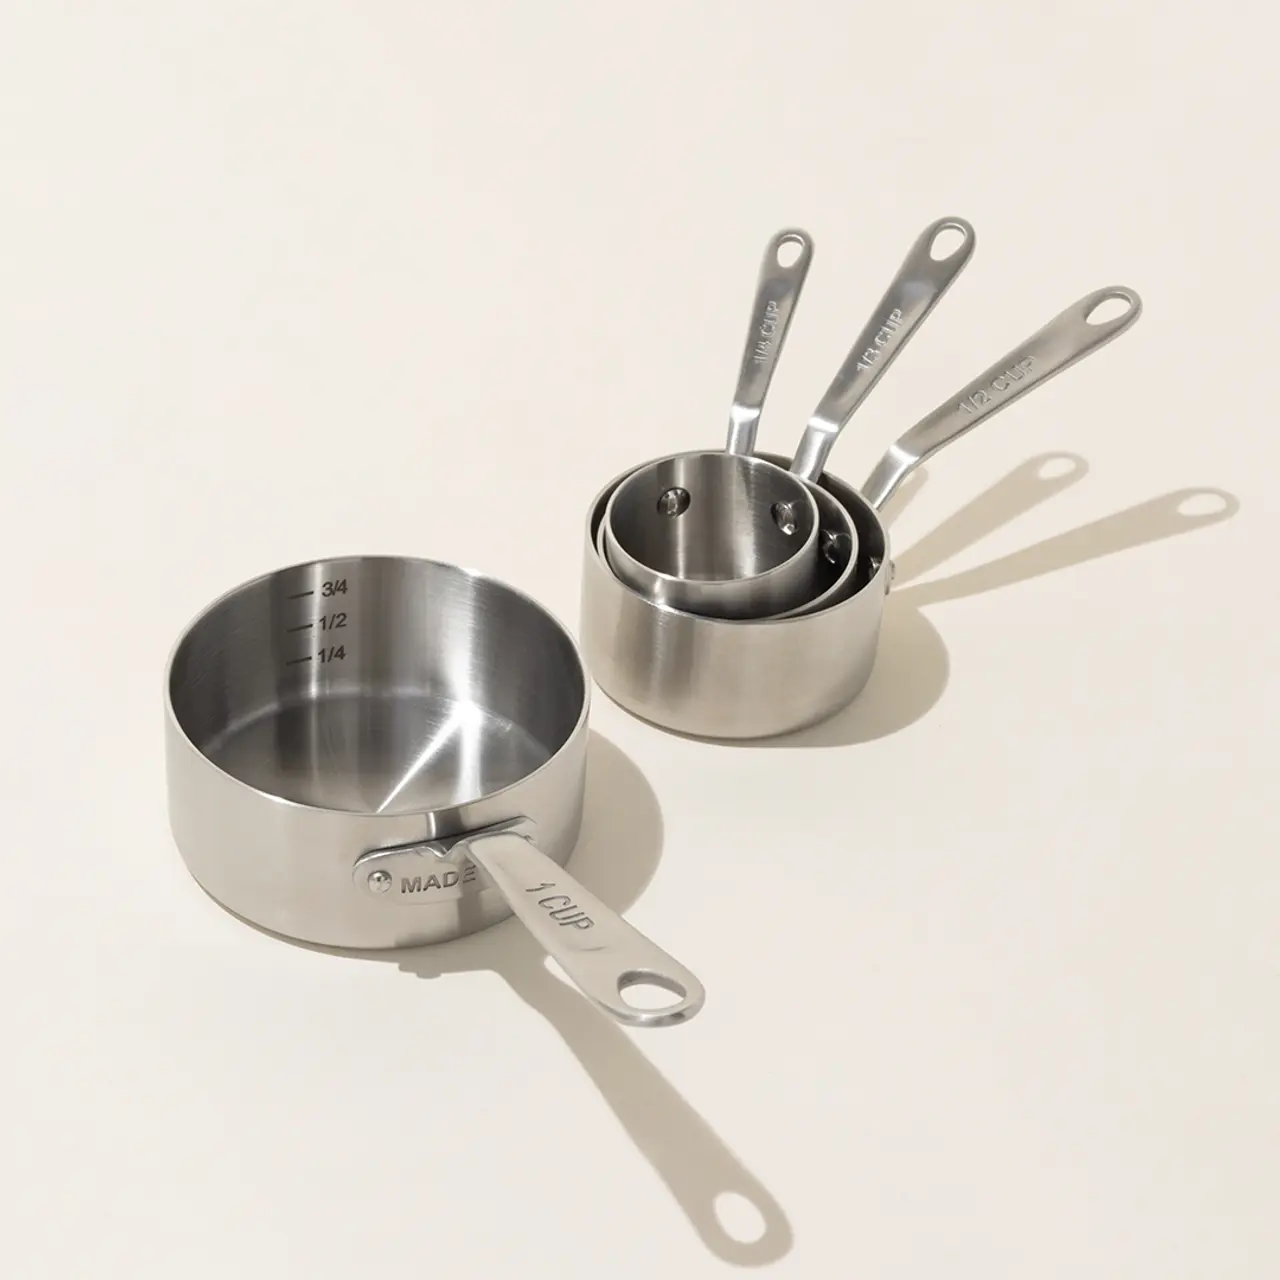 Three stainless steel measuring cups with engraved measurements sit neatly on a light surface.